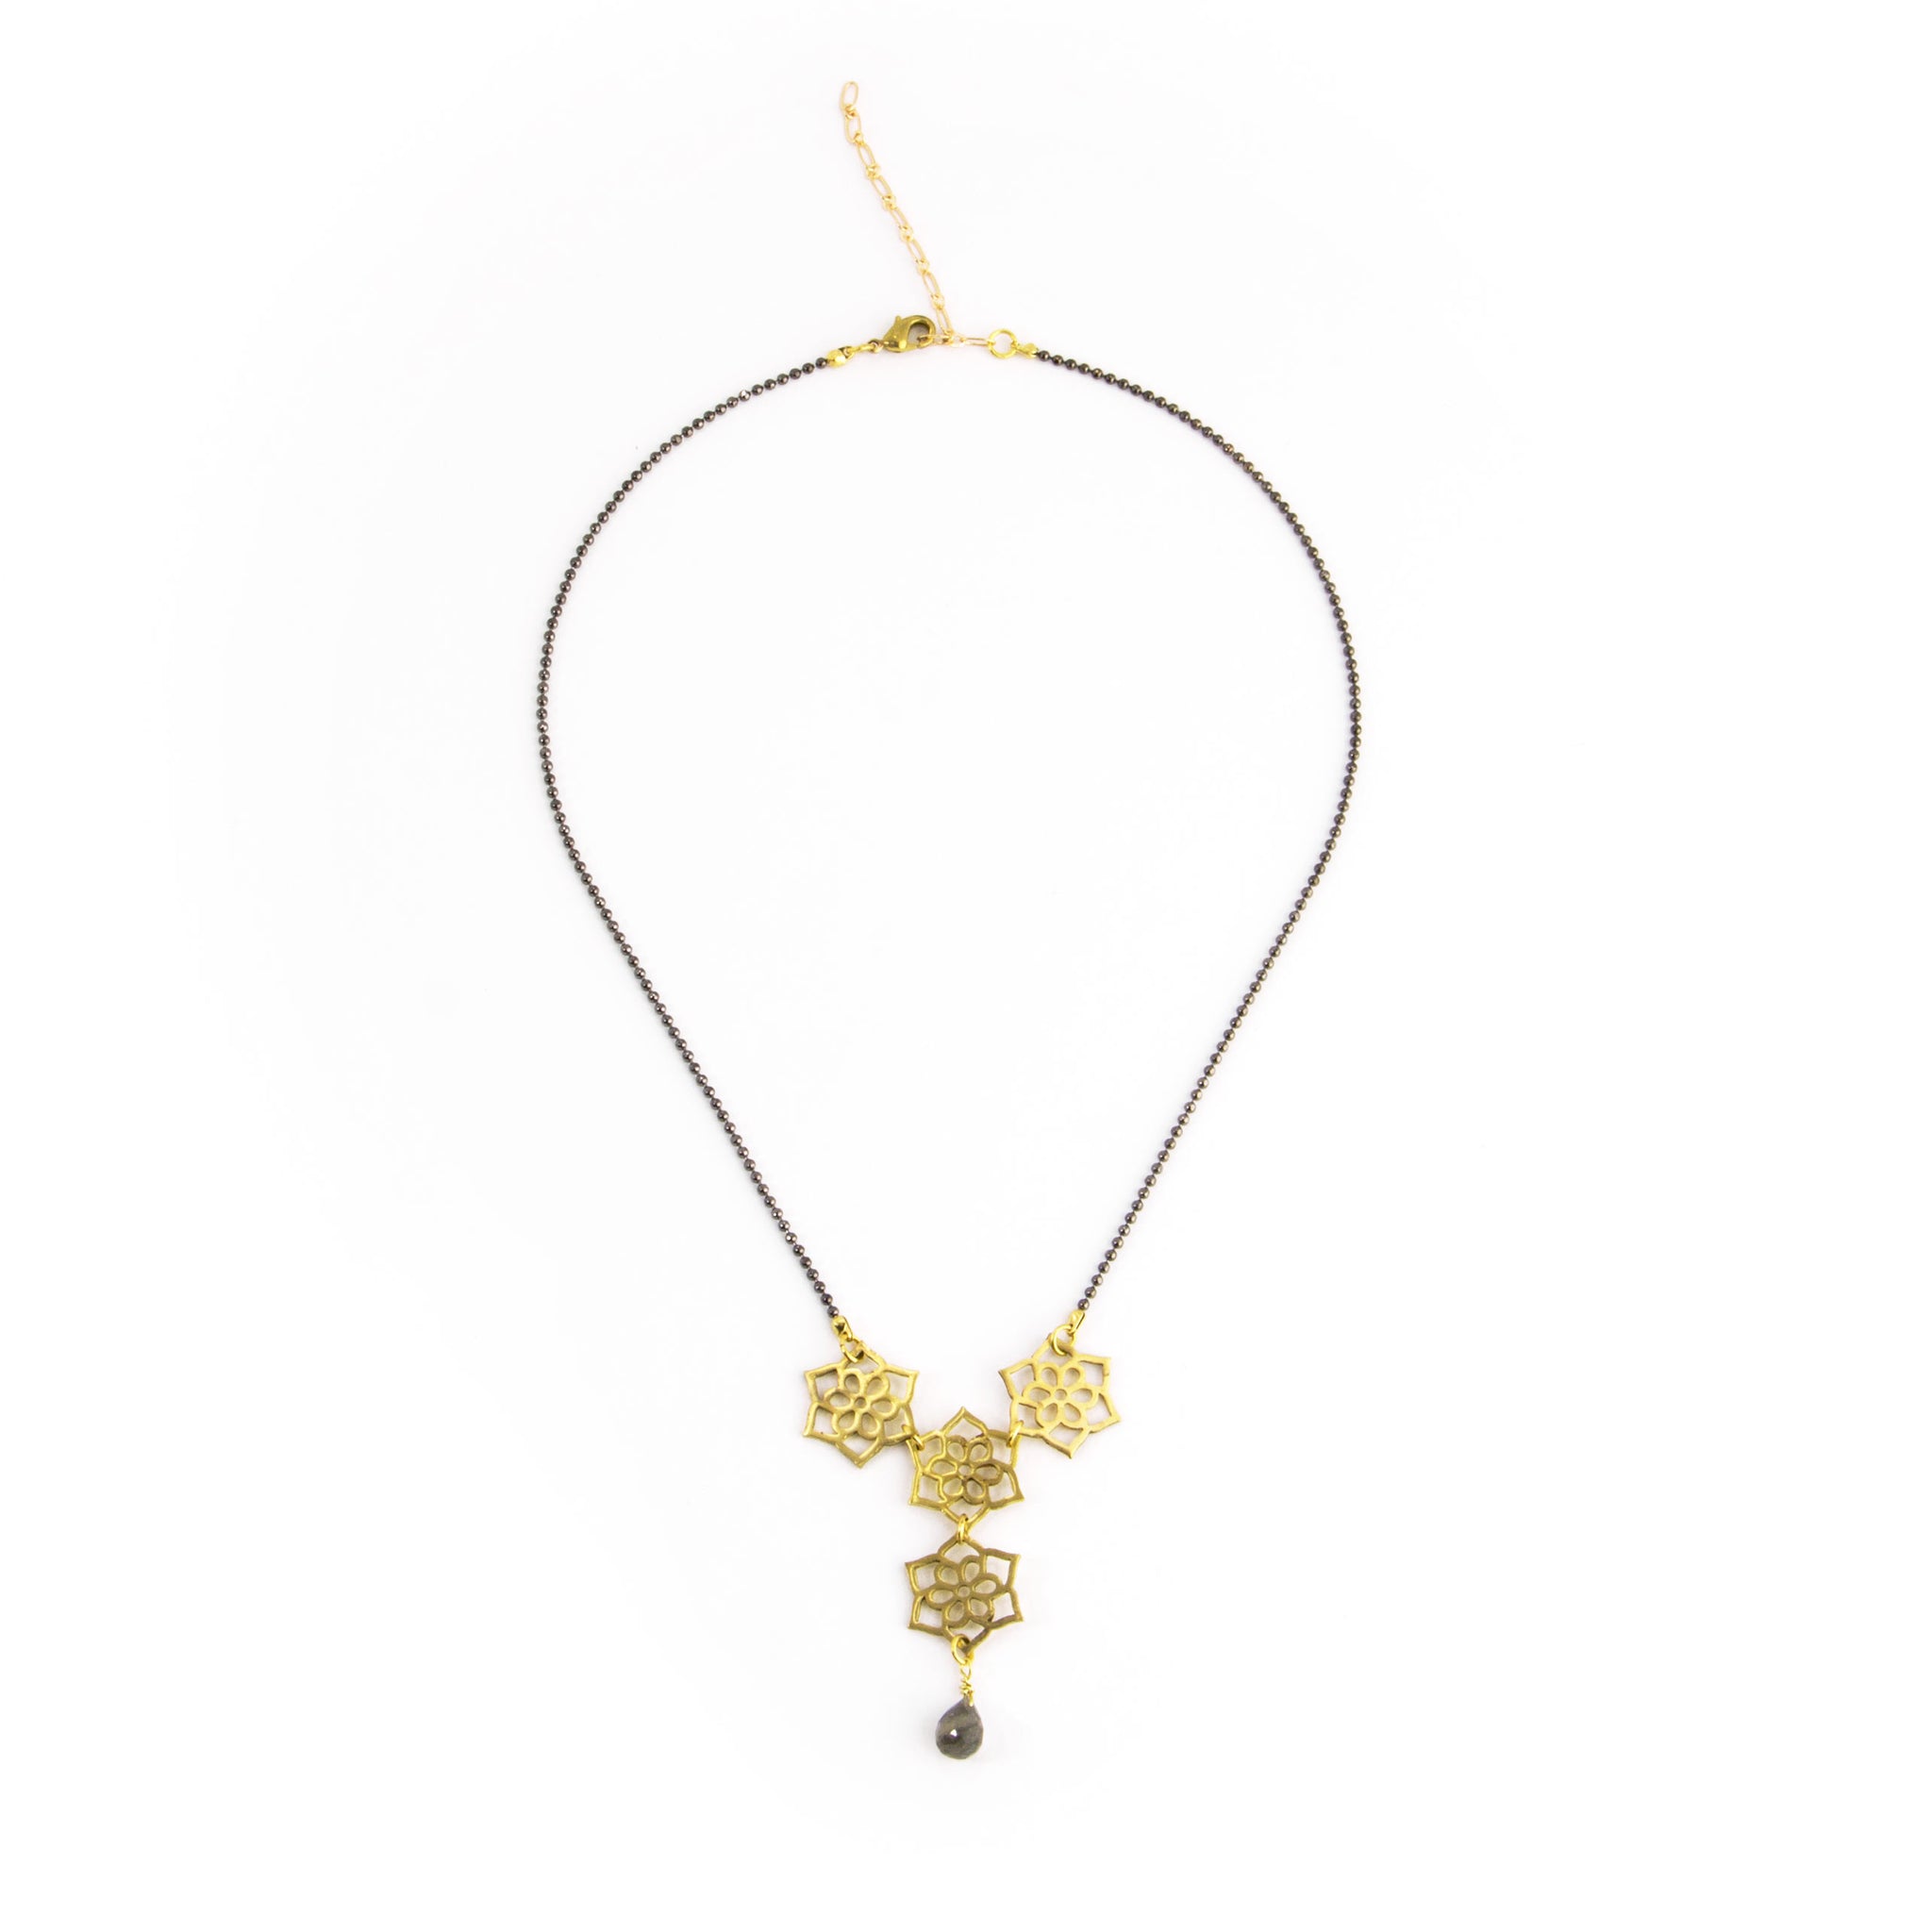 Lotus Chain Necklace